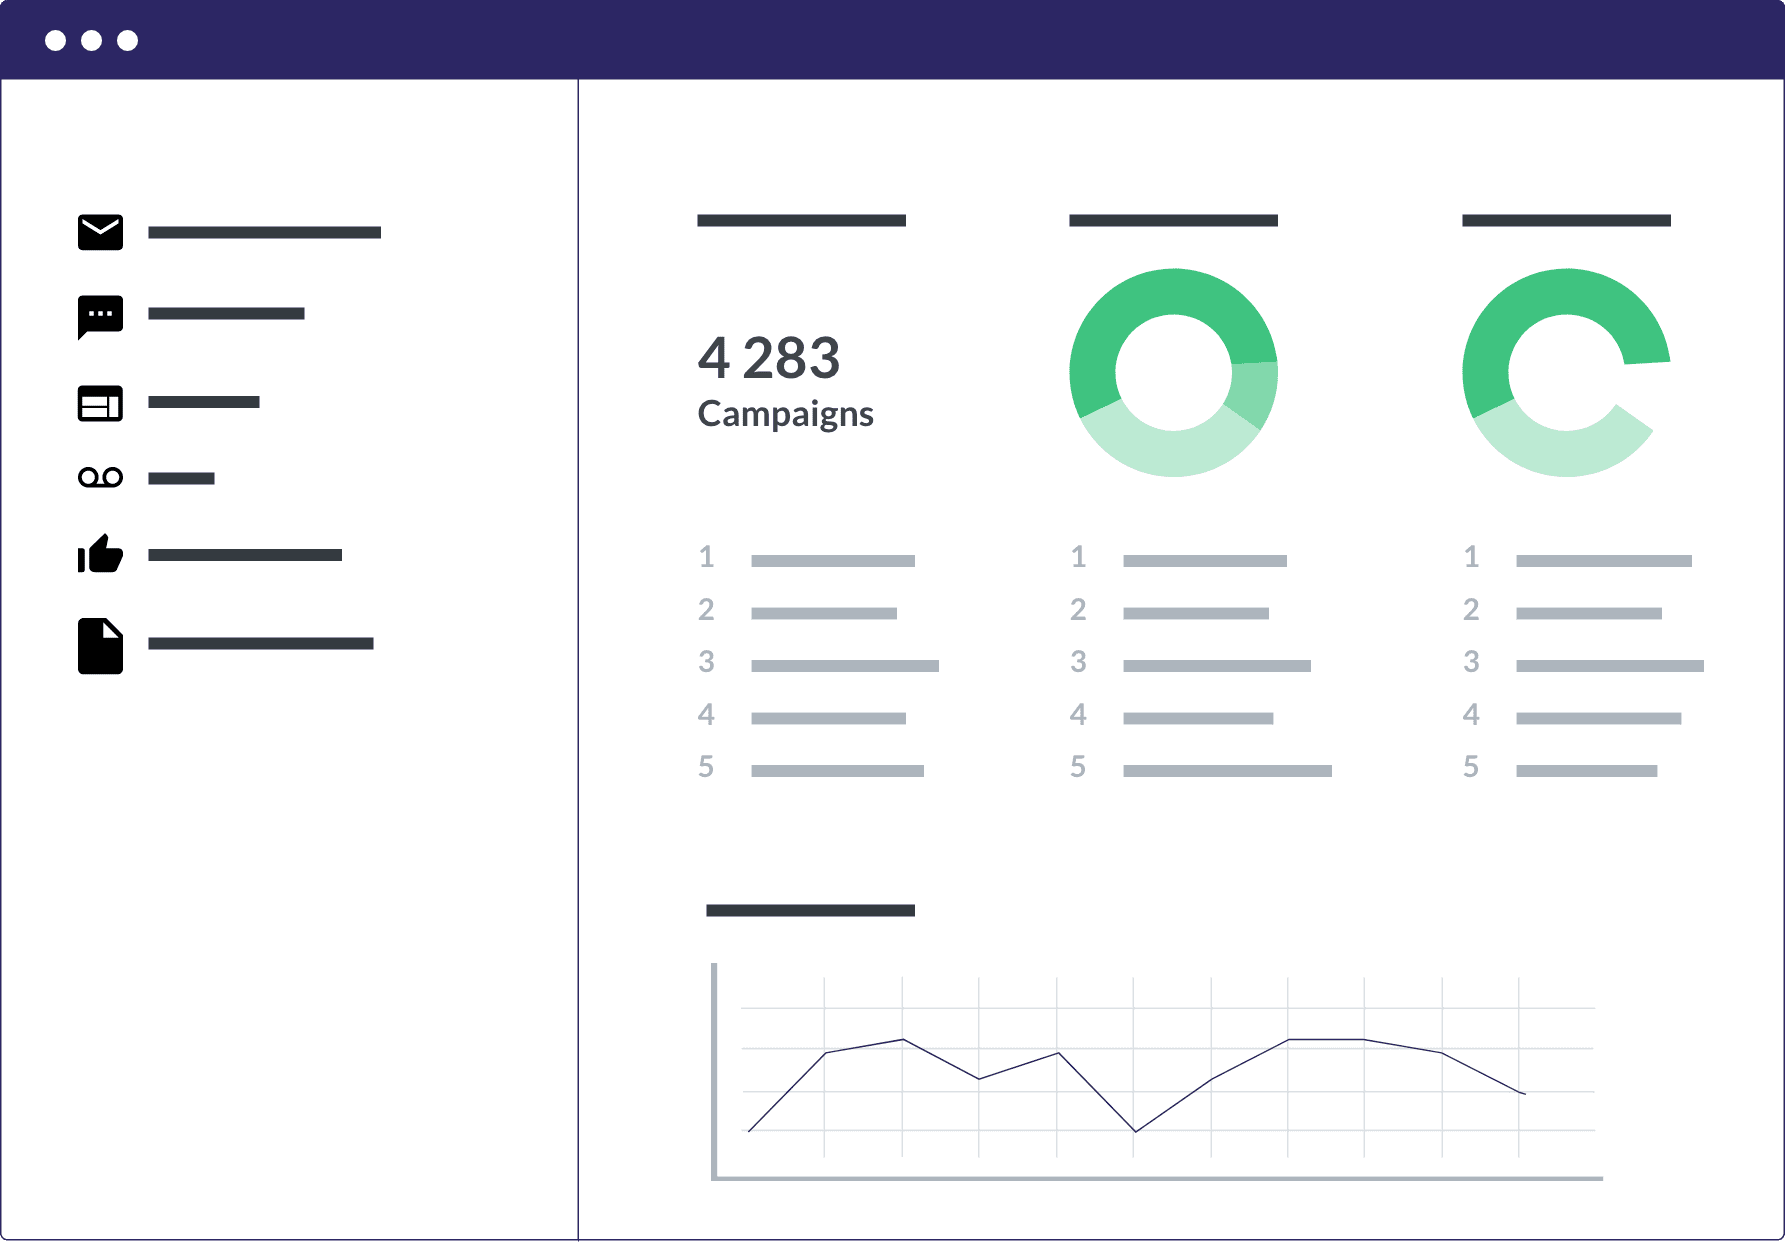 Statistical monitoring of campaigns